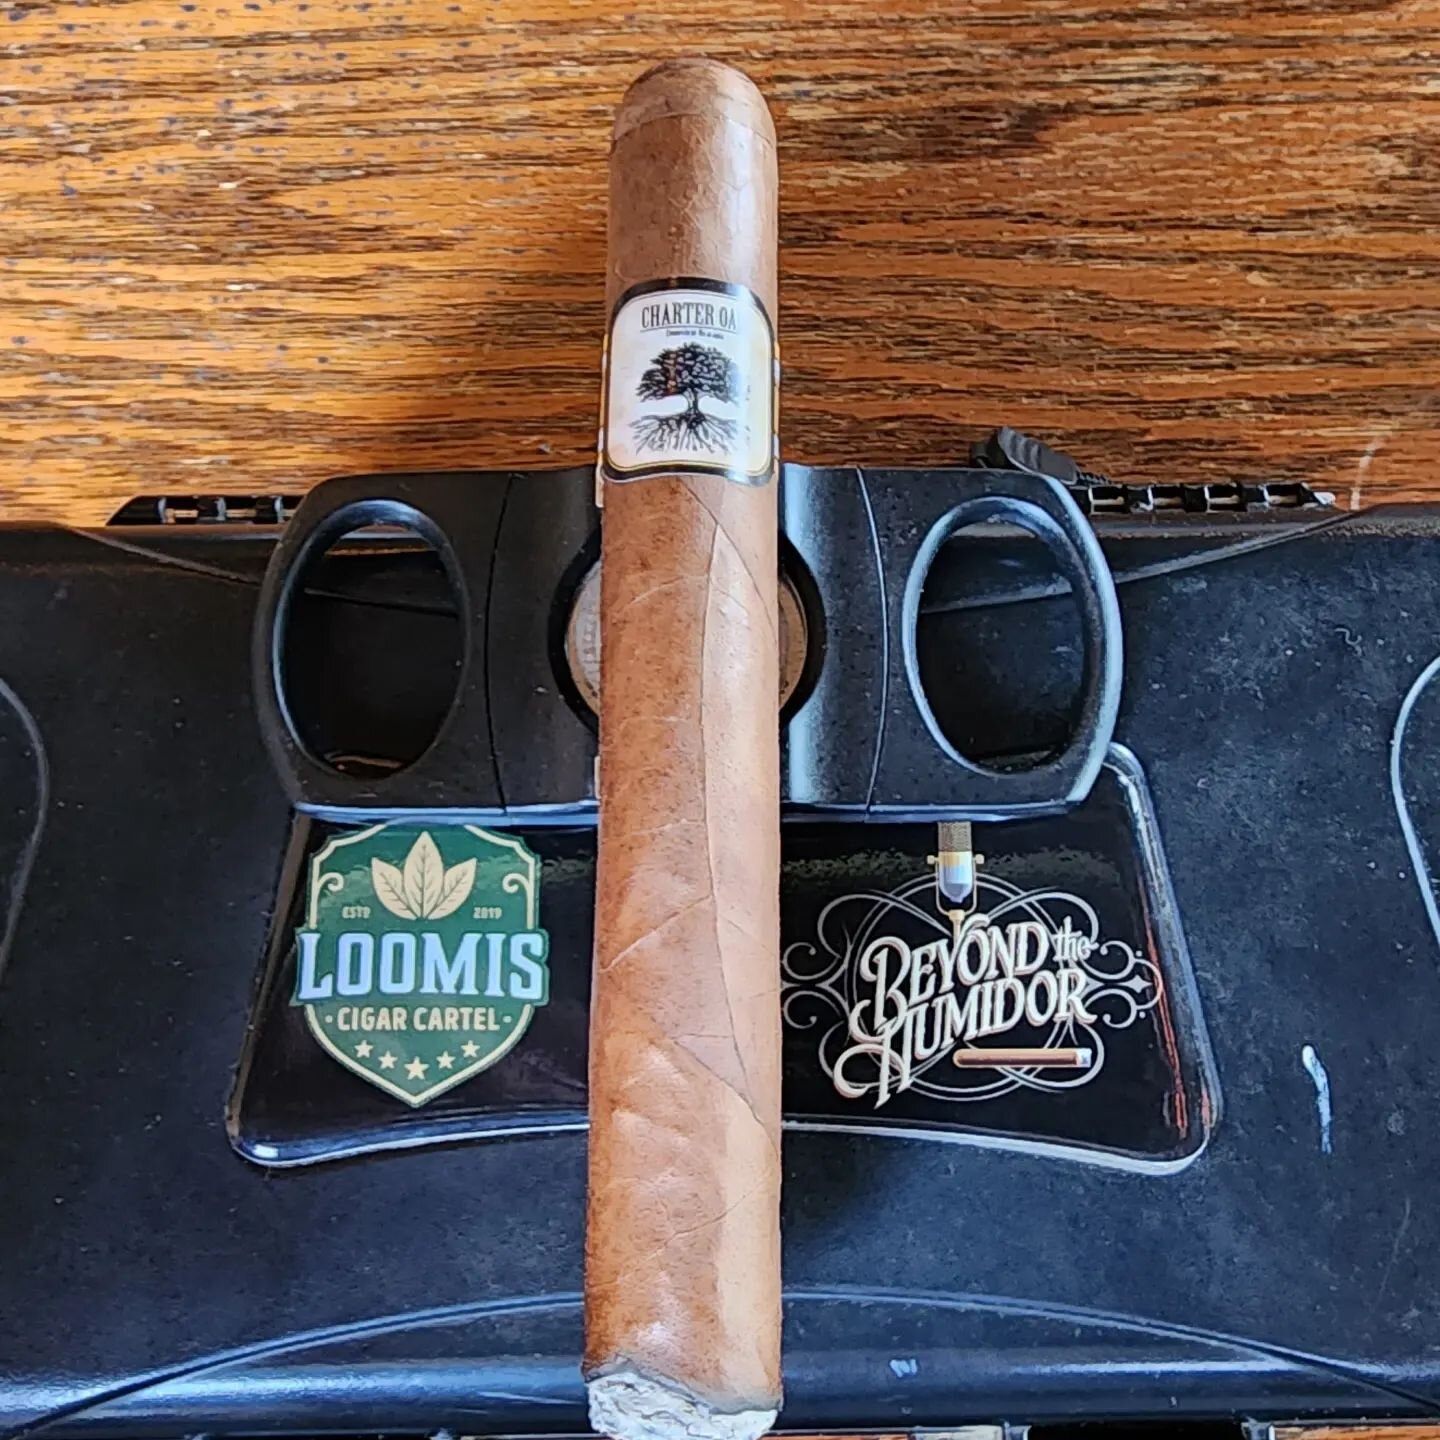 Once again we venture to the Vault in Meridian Idaho.  This time Scott Robinson and Greg Perry Visit.  Enjoying the Charter Oak Habano.  Get up here to Idaho and check them out!